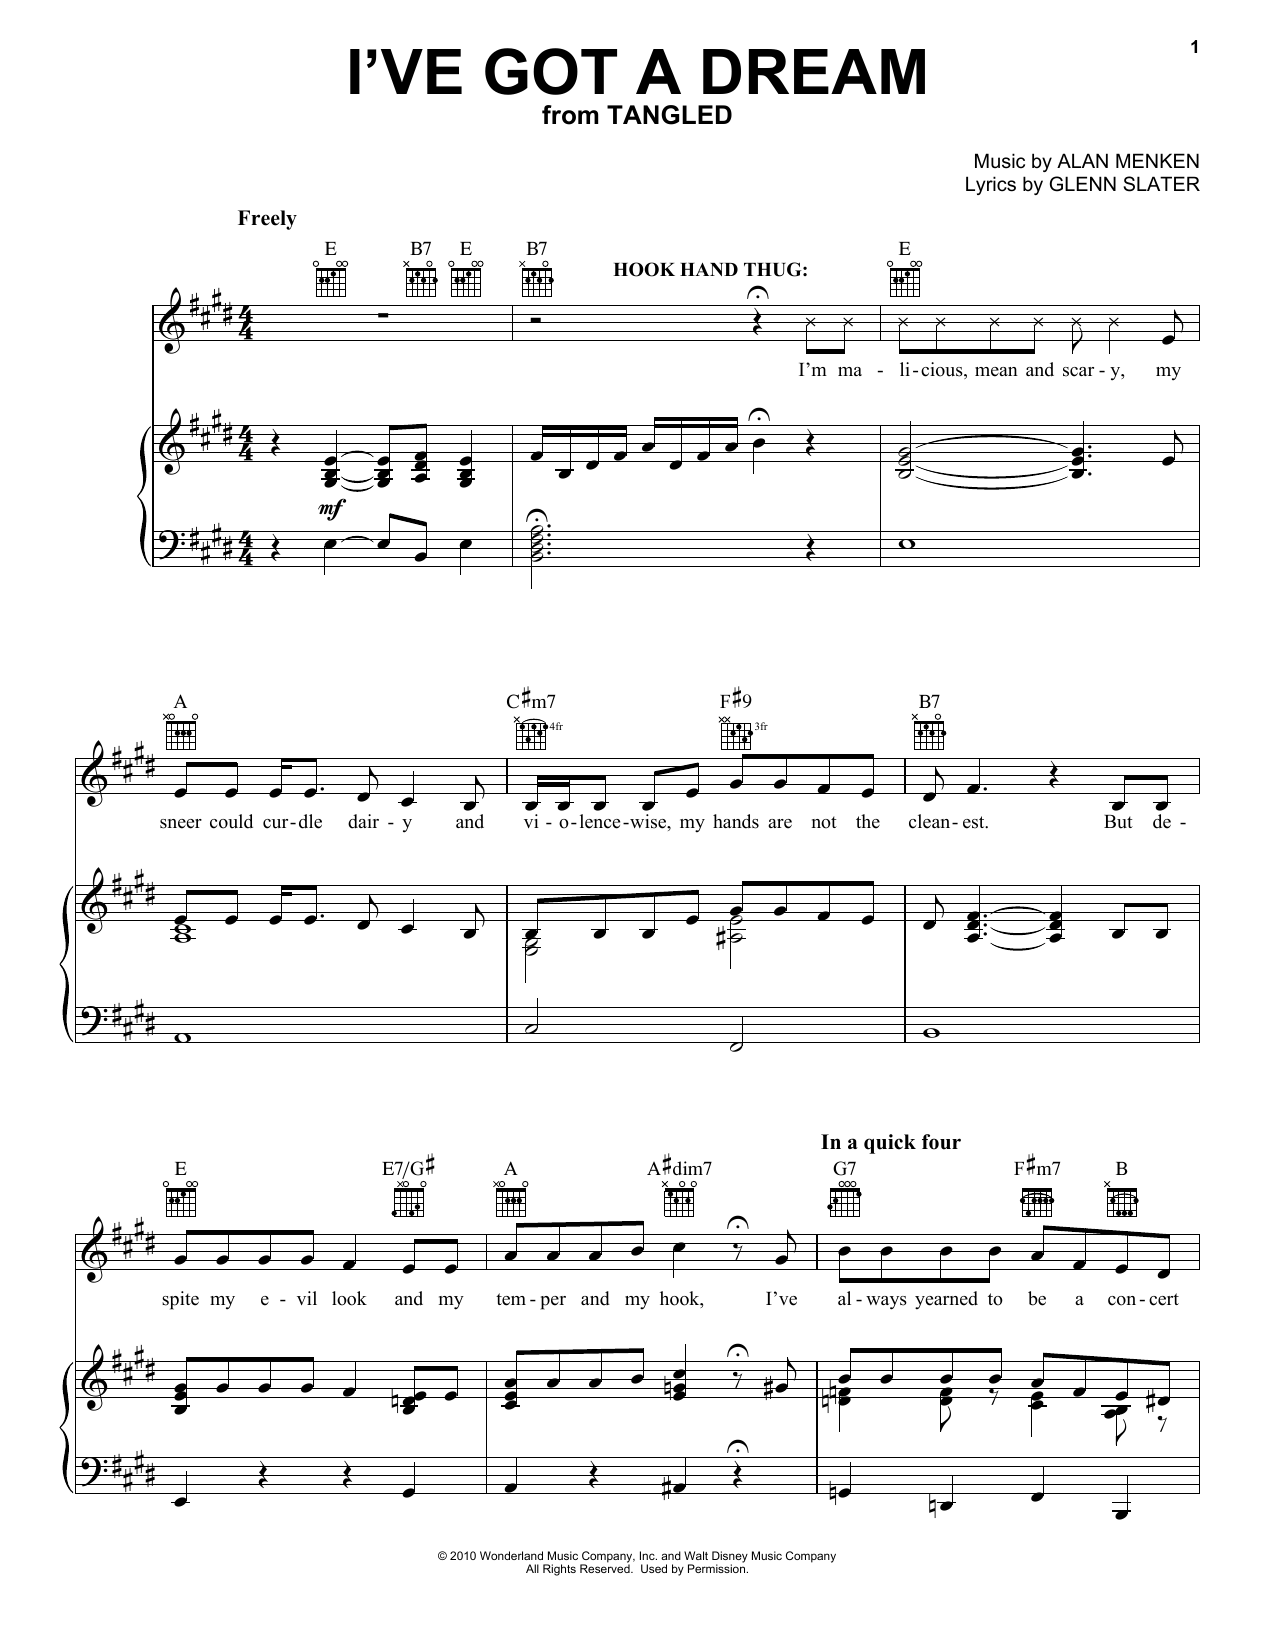 Alan Menken I've Got A Dream (from Disney's Tangled) sheet music notes and chords. Download Printable PDF.